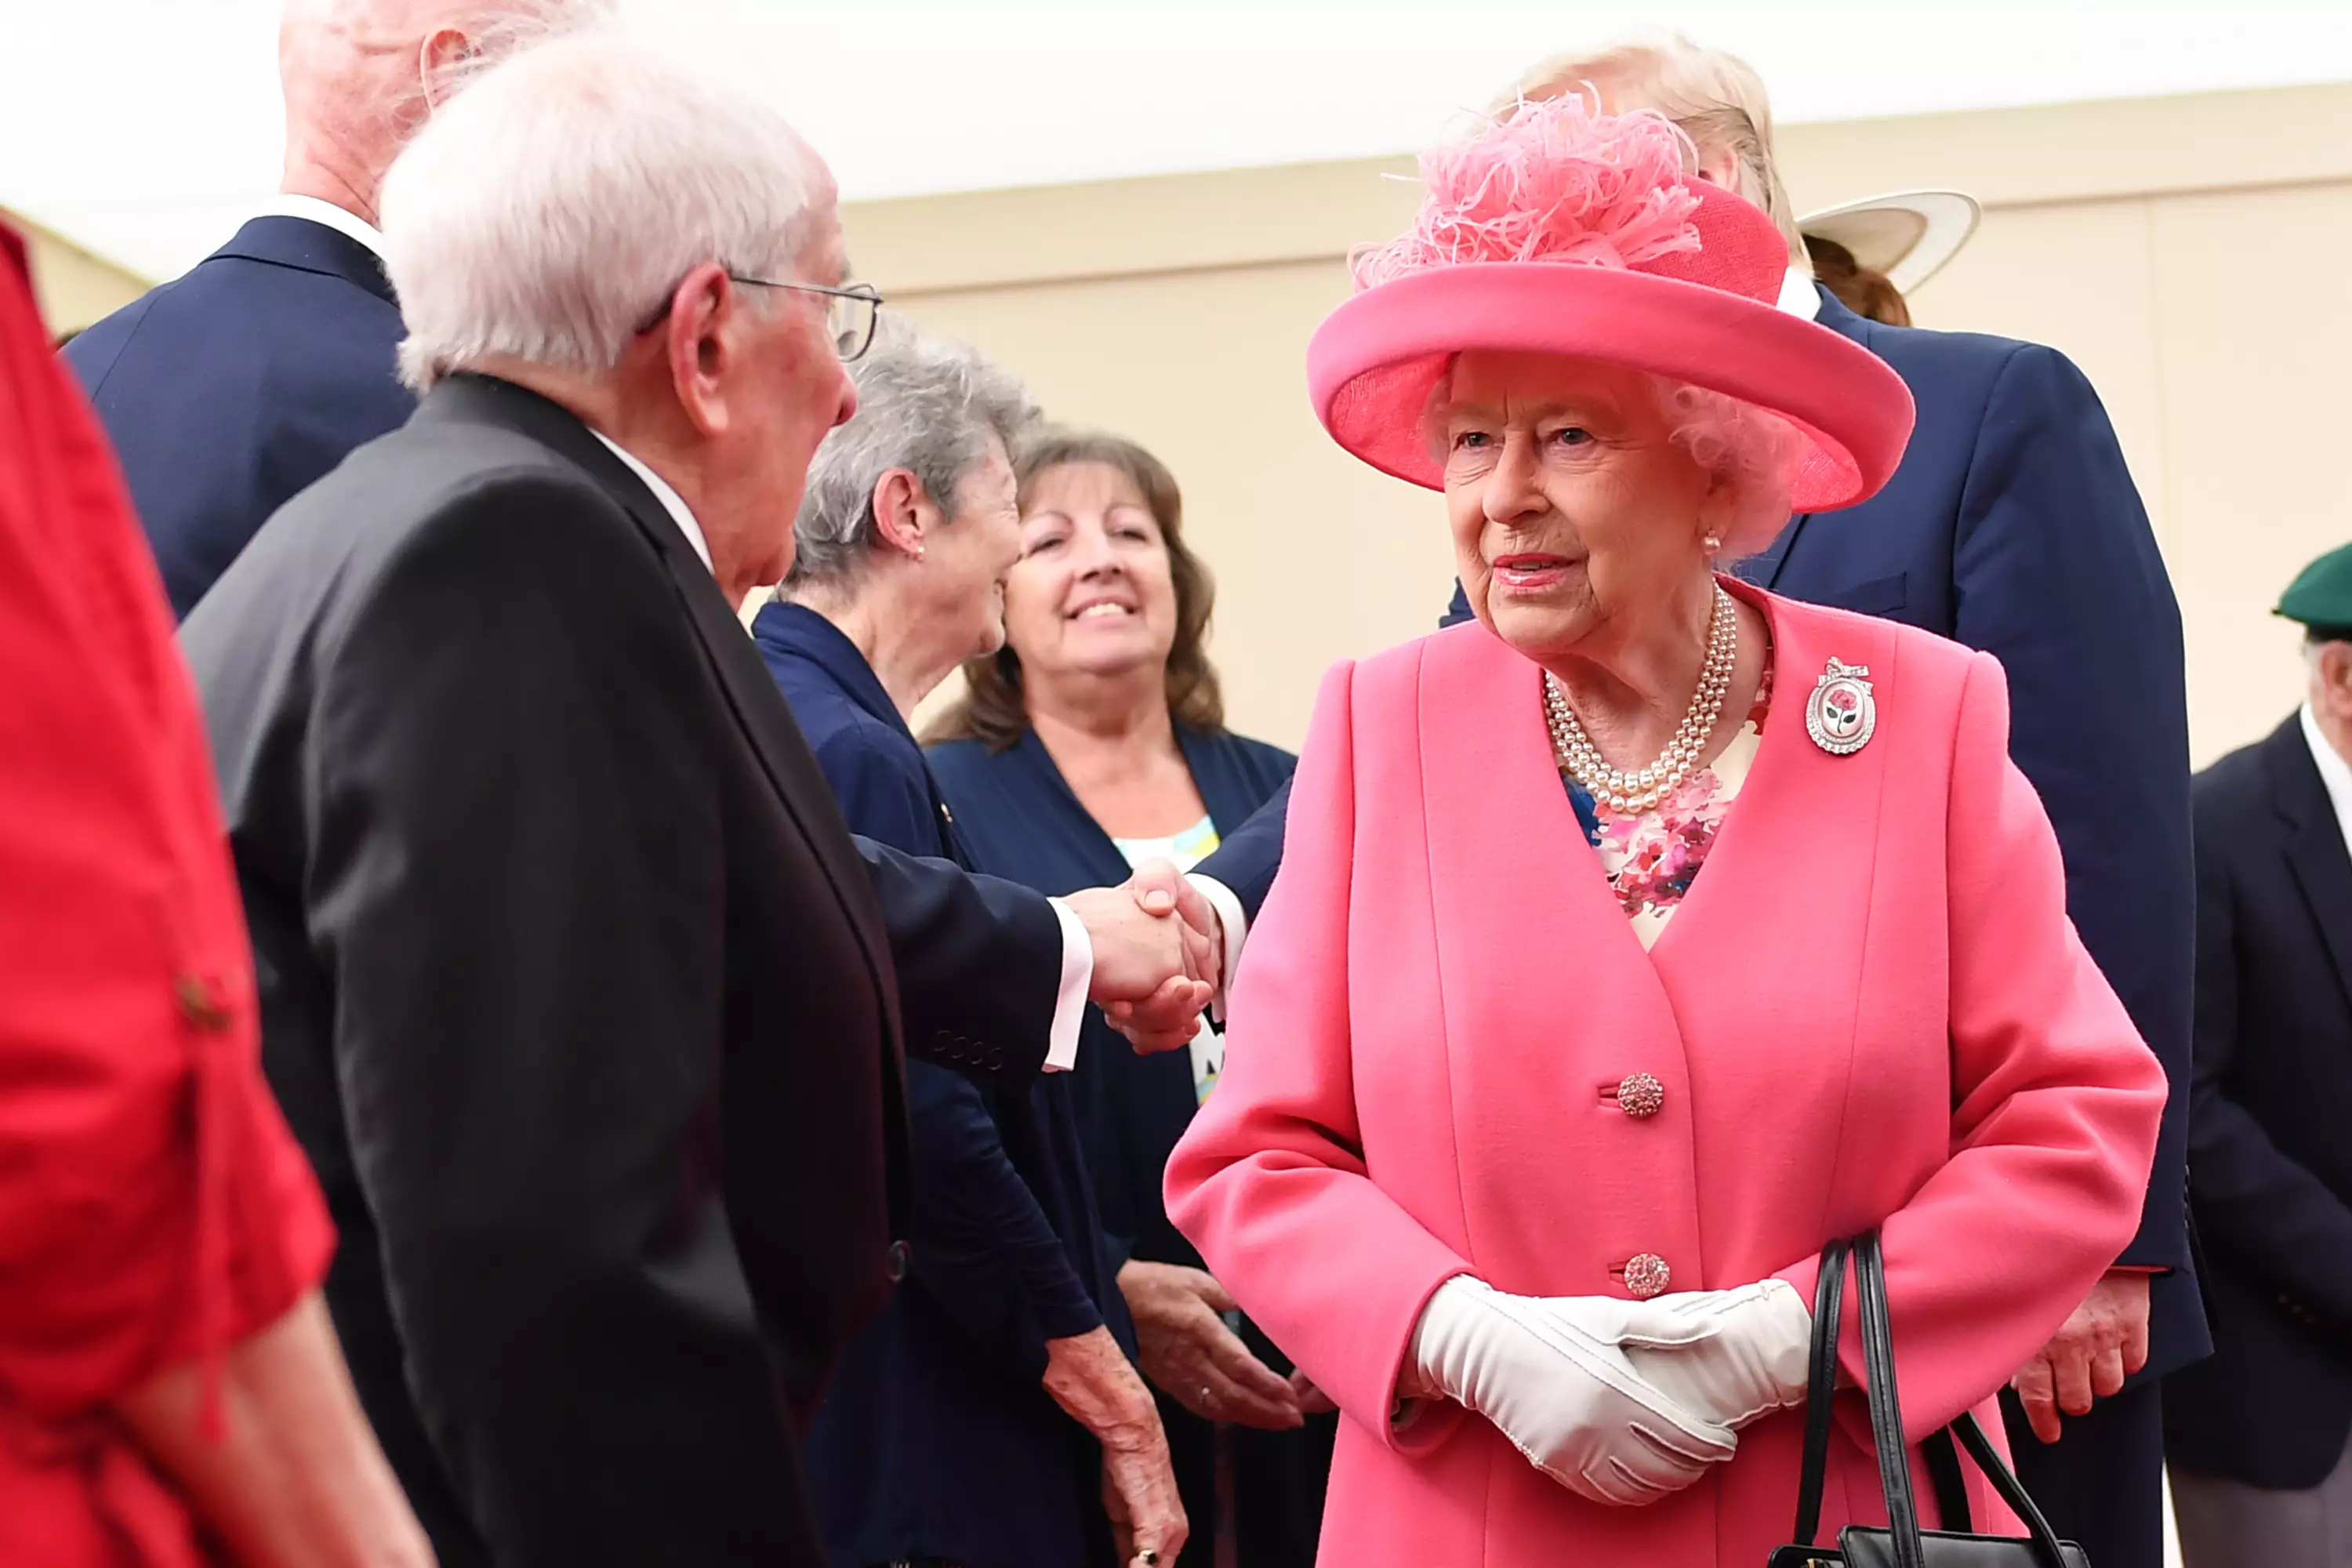 The war hero also spoke to the Queen during the 75th anniversary event in Portsmouth.